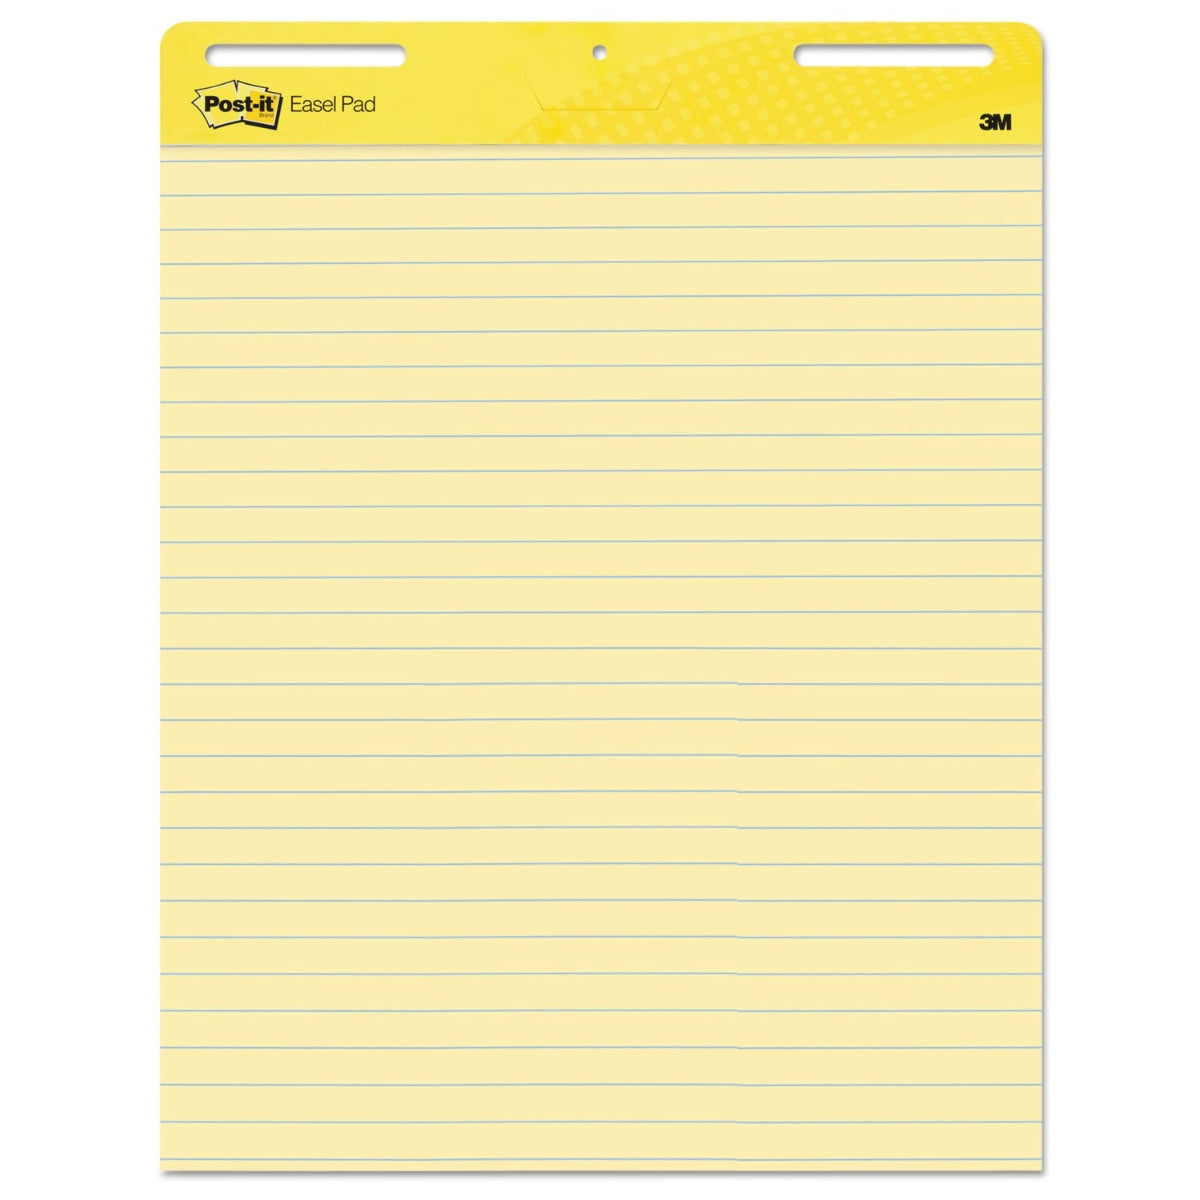 3M Post-it Self-Stick Easel Pad 561, 25x30 inches, line ruled, 2pad/pack, Yellow